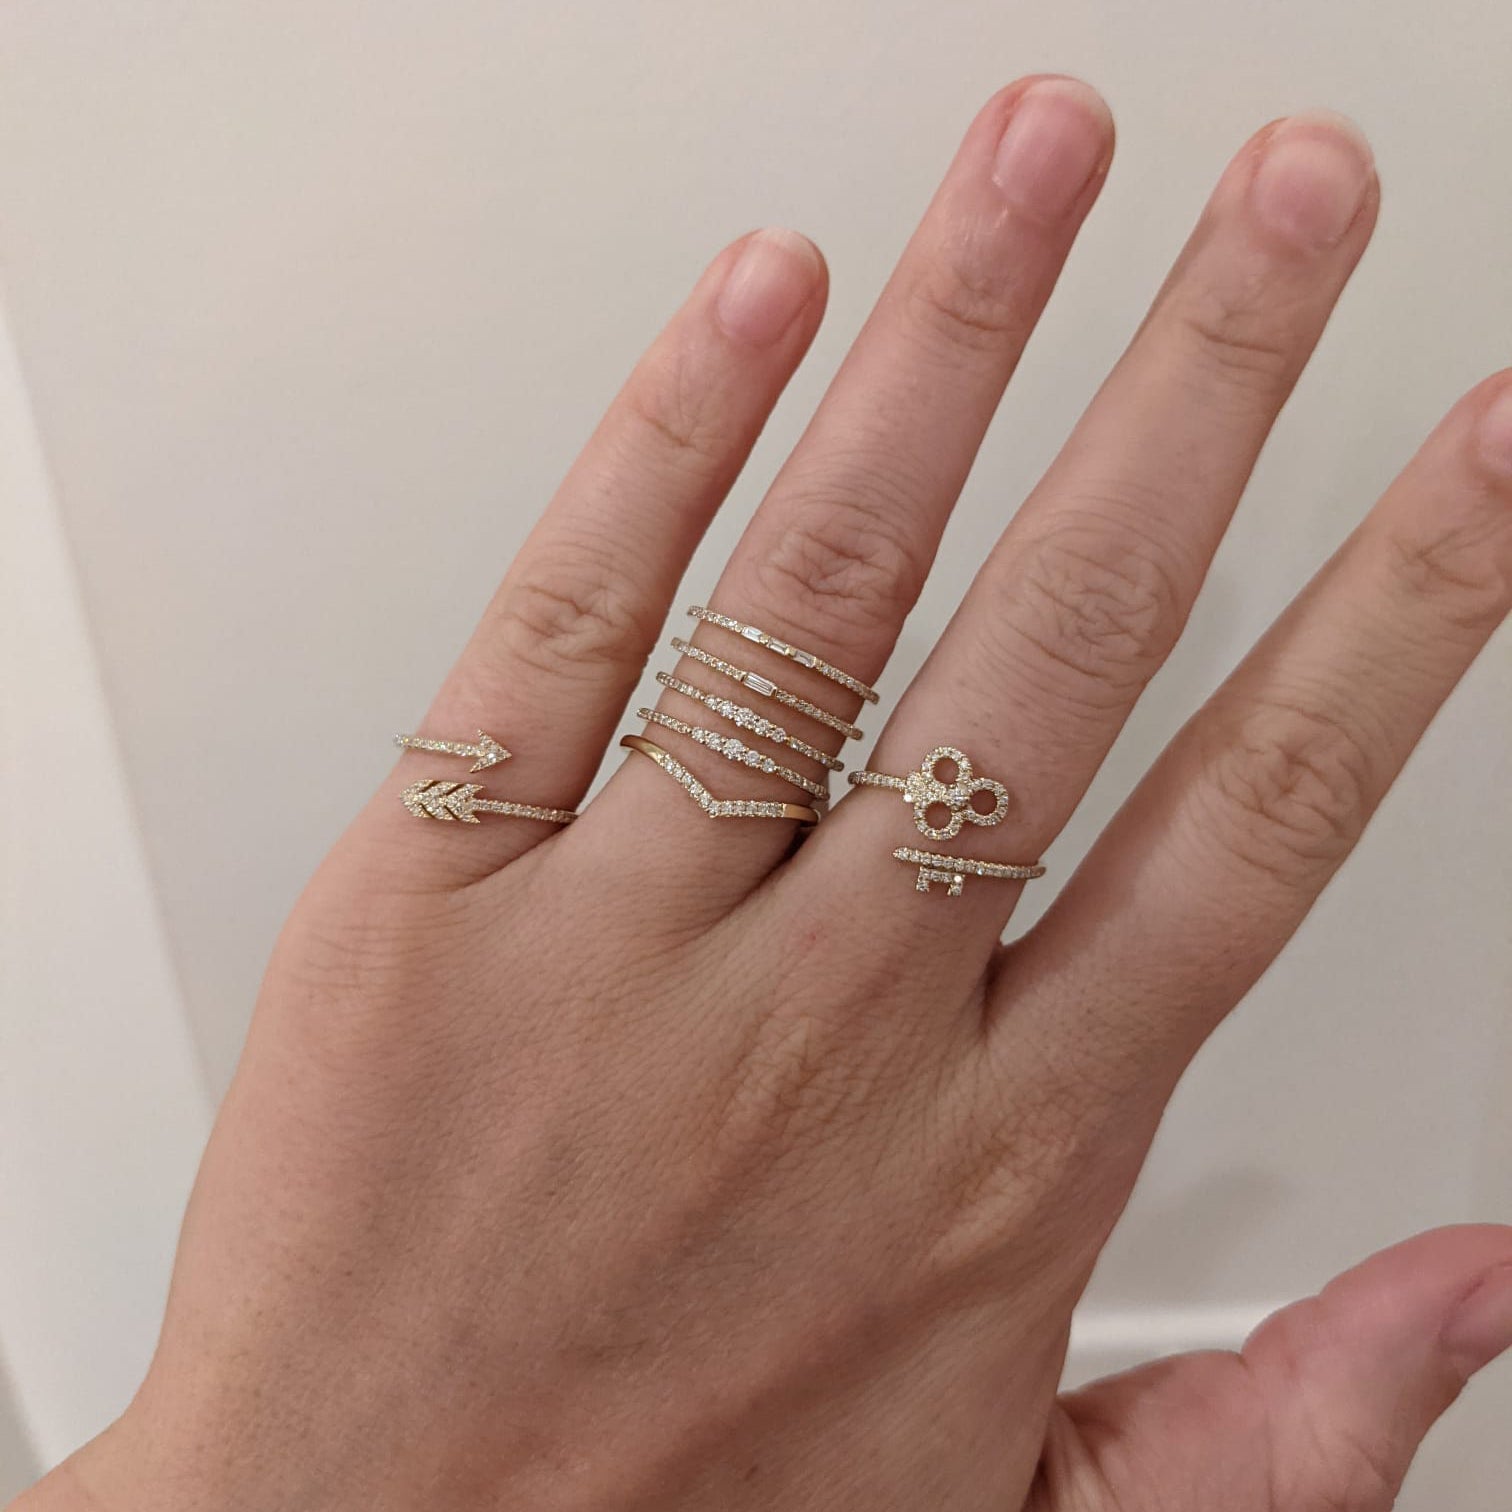 18 Types of Rings Everyone Should Know - The Caratlane